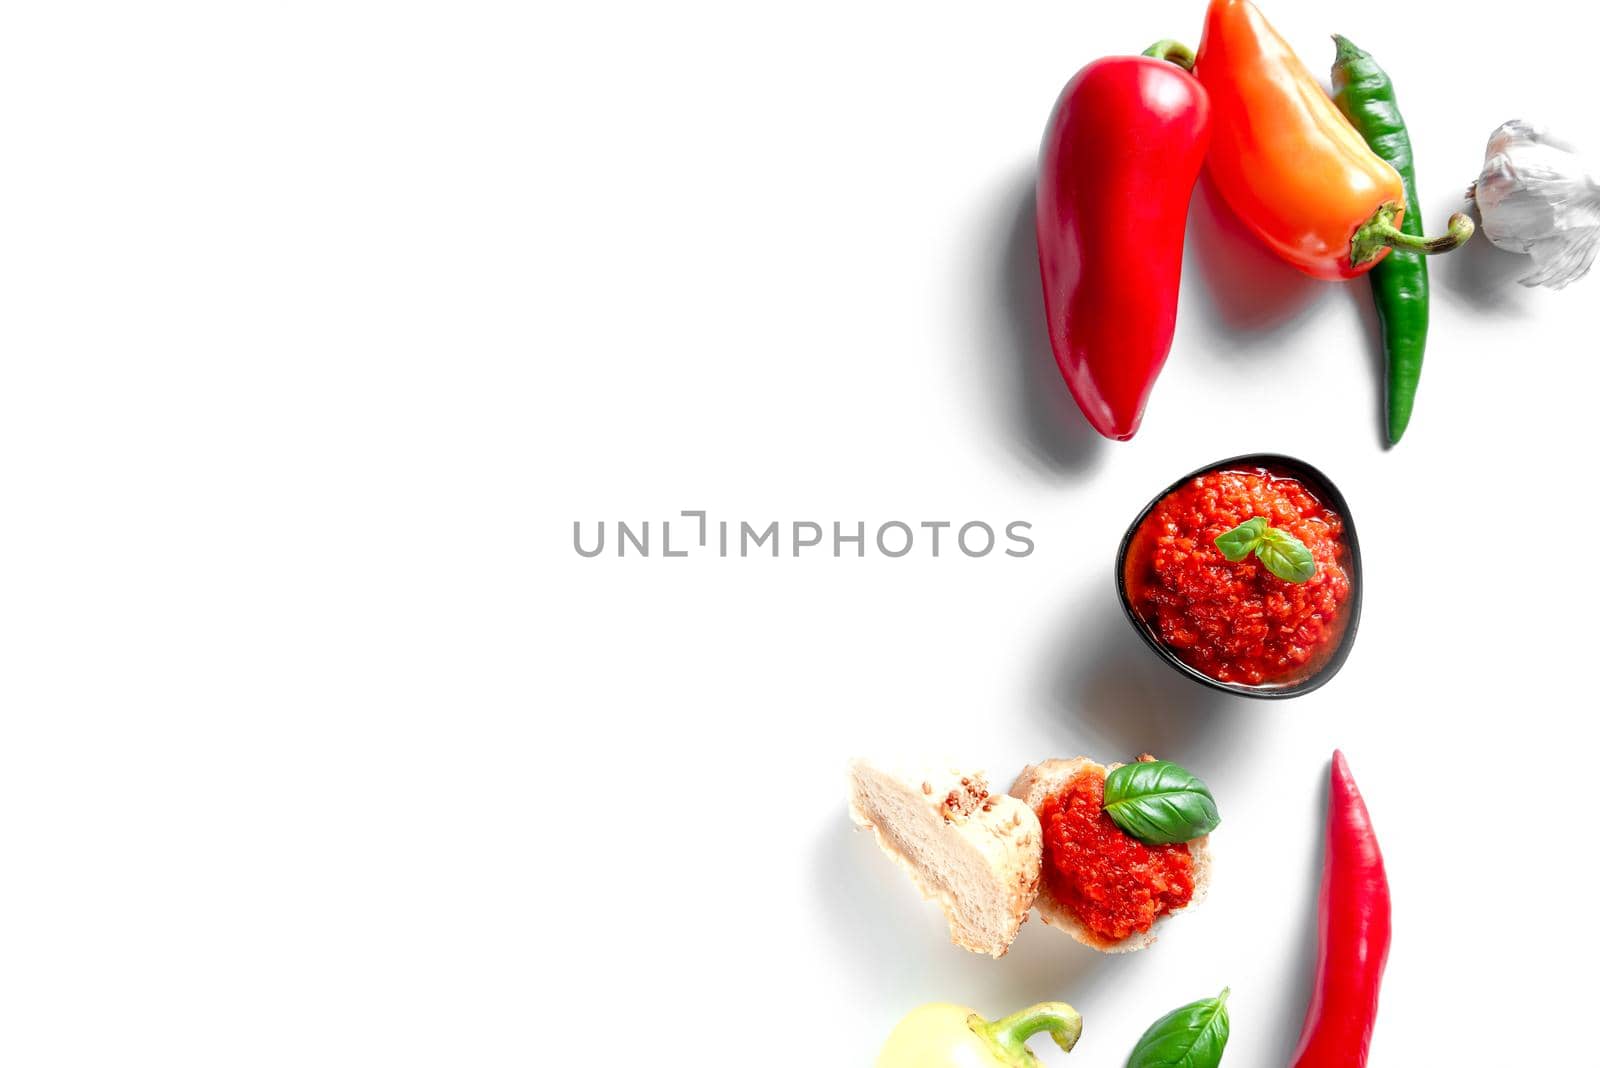 Ingredients for cooking Ajvar sauce. Place for the text. Ajvar is a locally known red pepper and eggplant seasoning that is produced in the Balkans - Turkey, Serbia, Montenegro, Albania and is vegan. by gulyaevstudio